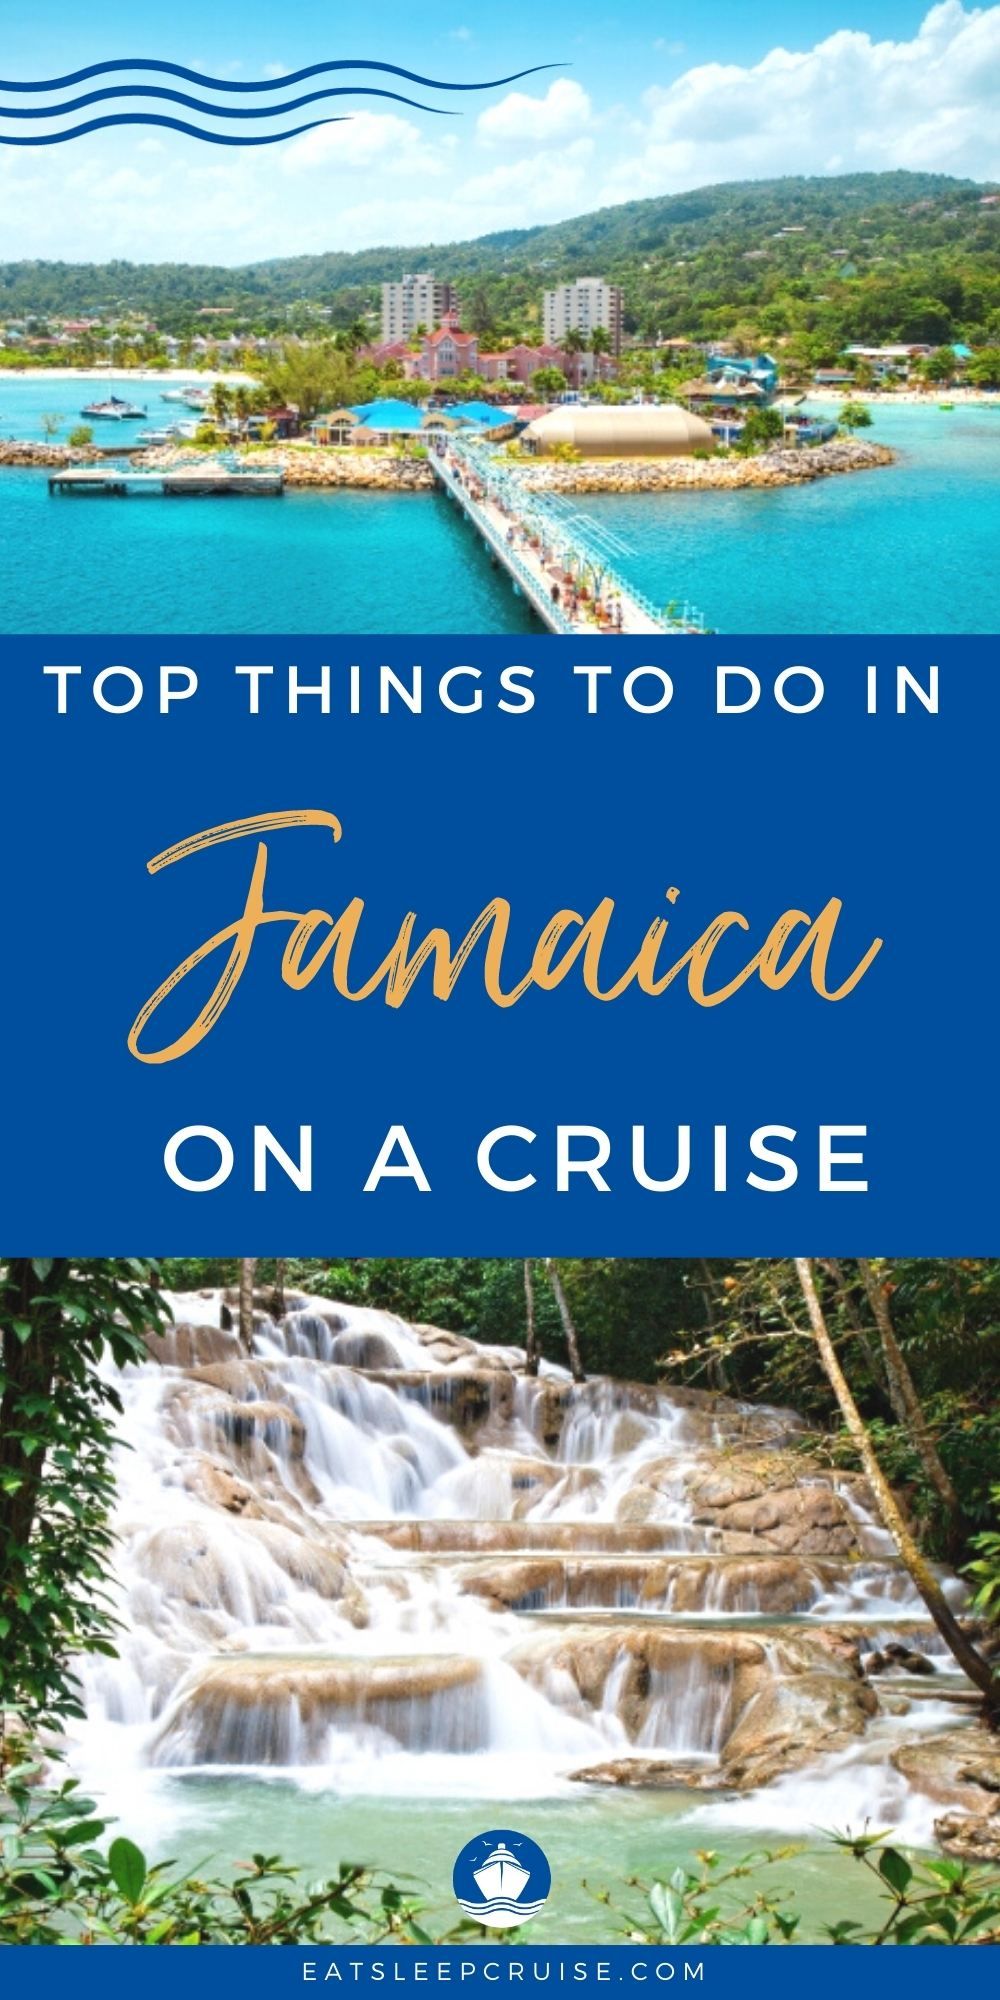 Best Things to Do in Jamaica on a Cruise